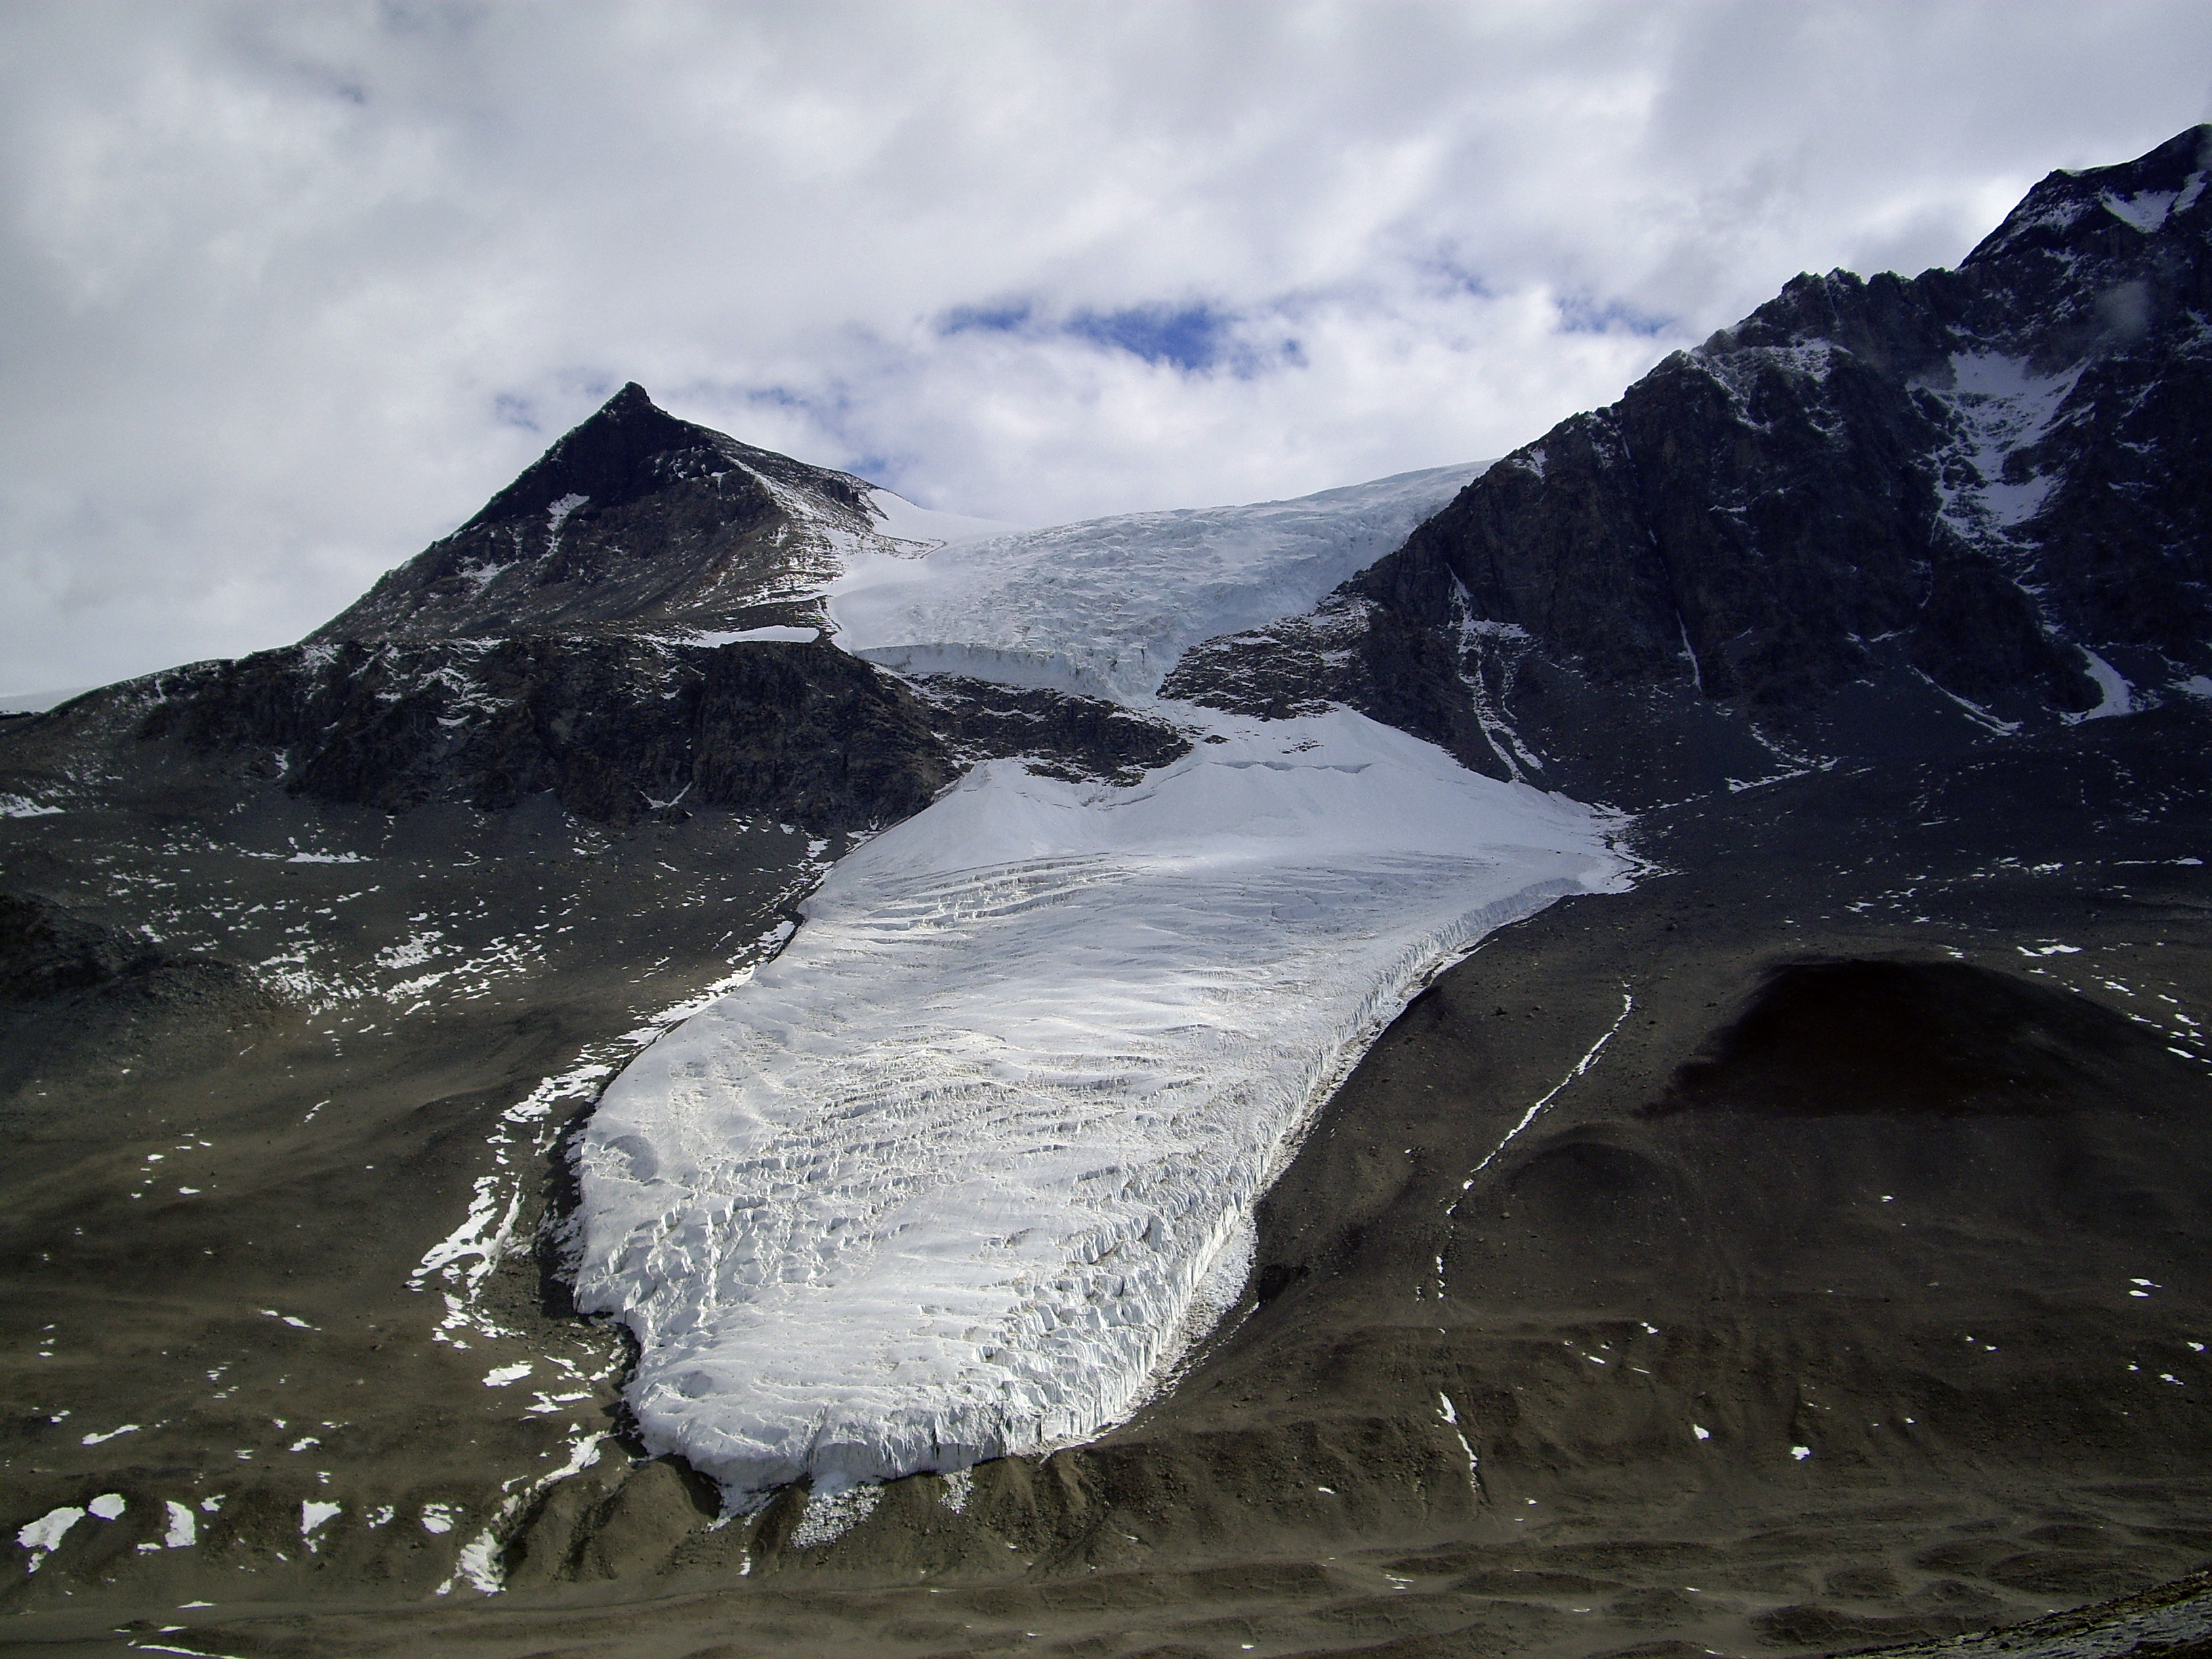 A glacier flowing down a mountainside.